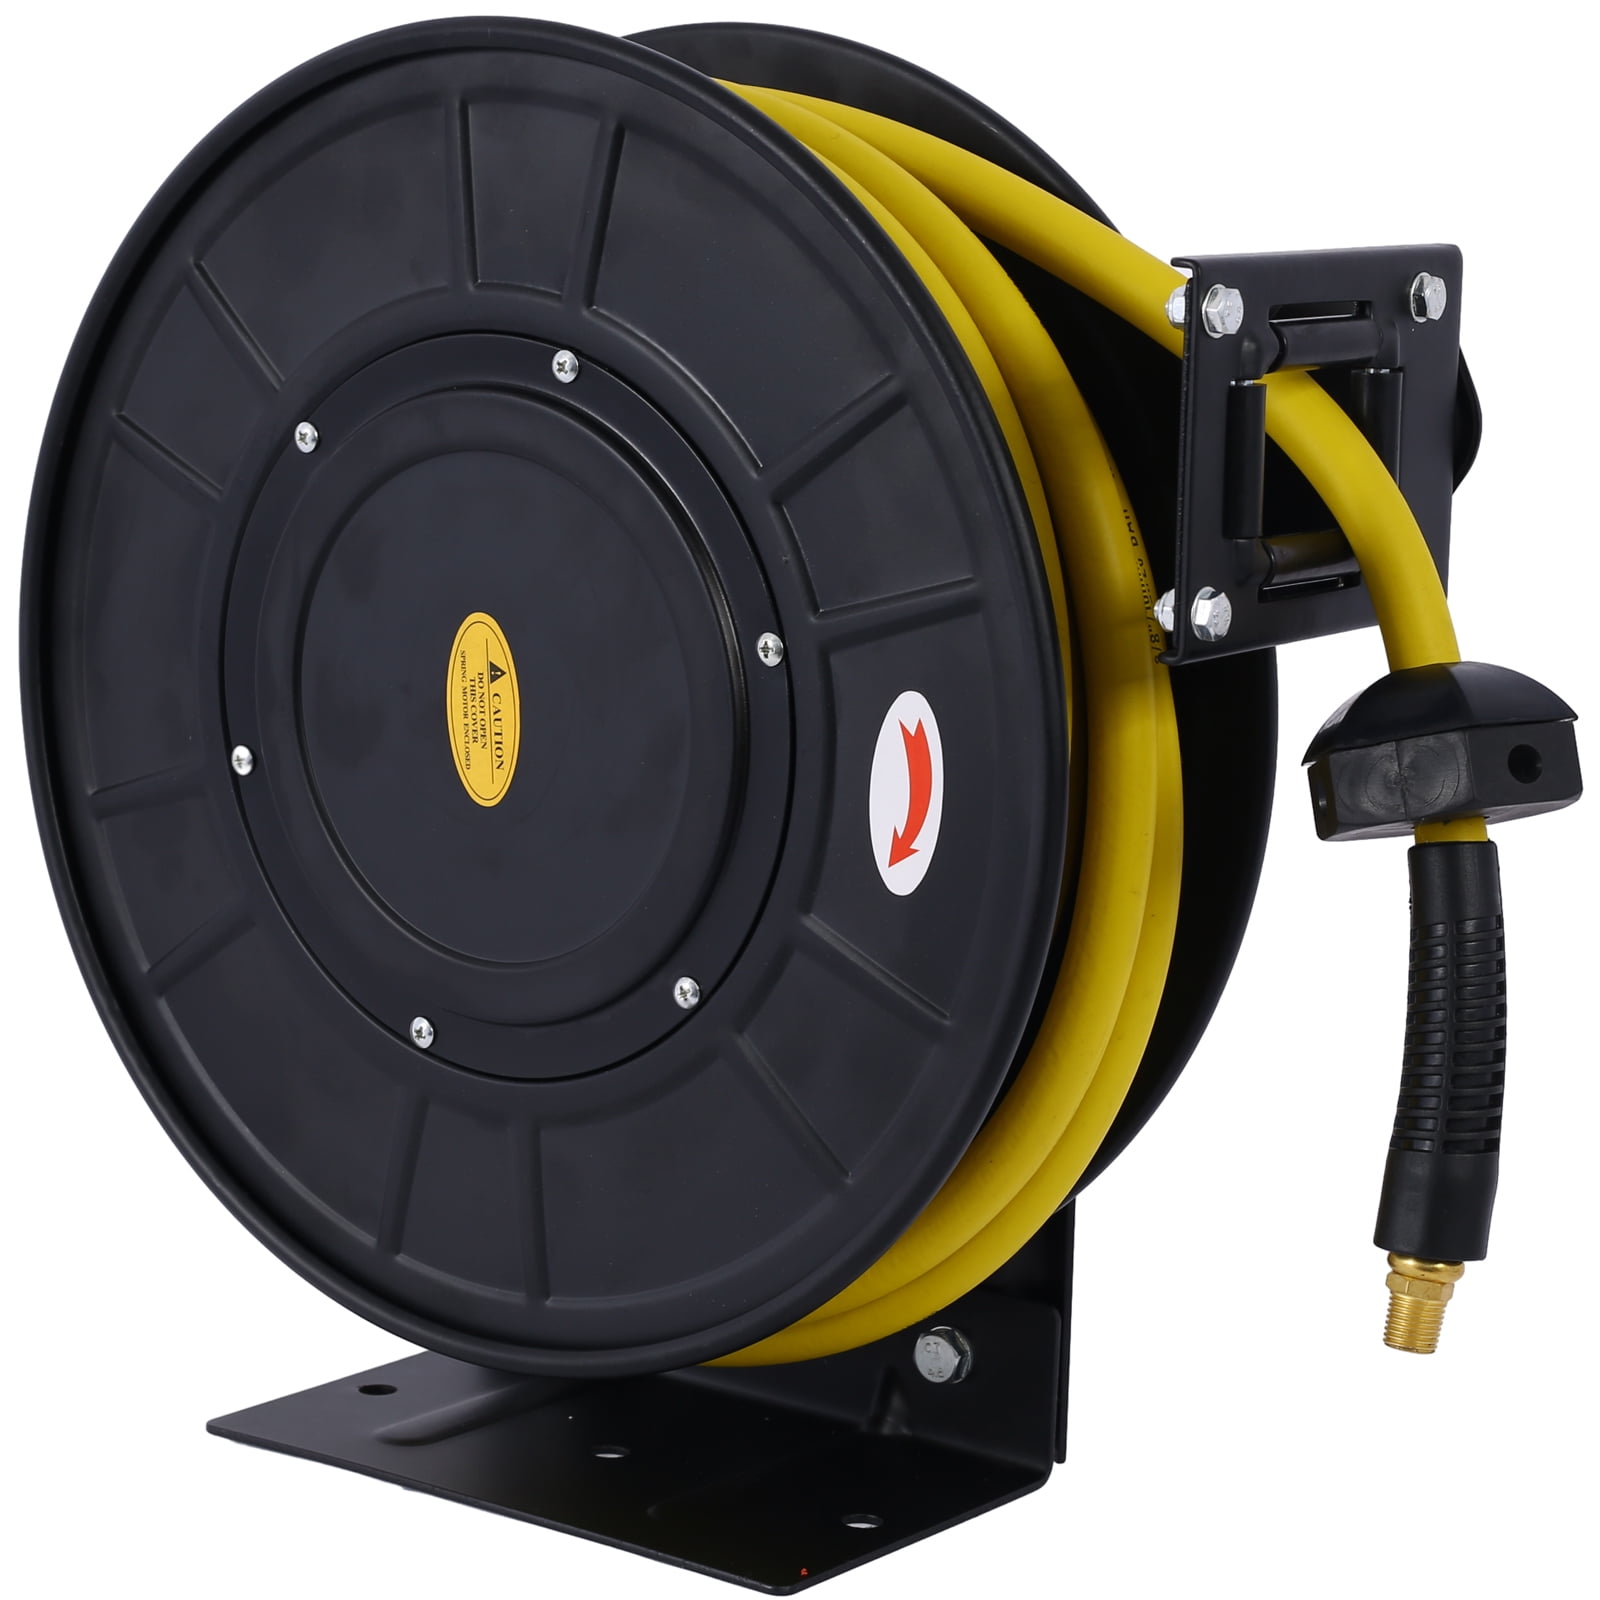 Oil Shield Retractable Air Hose Reel With 1/2in x 50ft Rubber Hose 300 PSI